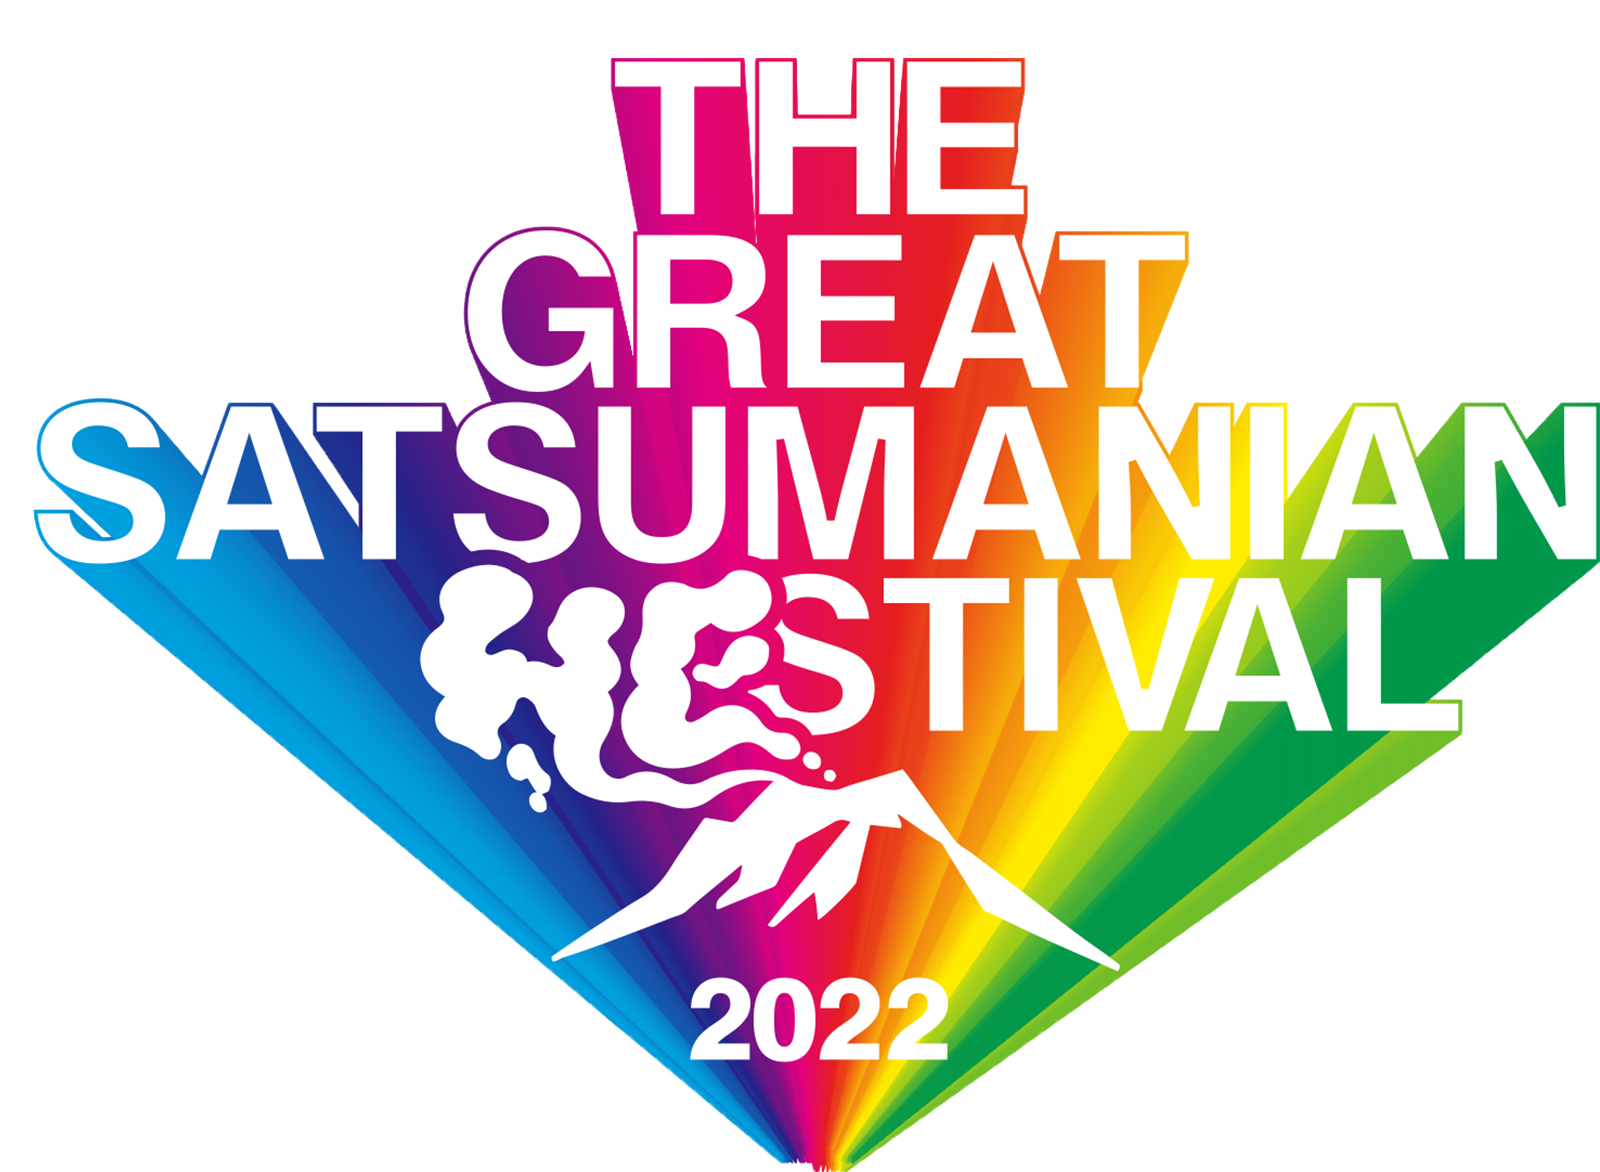 THE GREAT SATSUMANIAN HESTIVAL 2022 SPECIAL JTBアクセスバスツアー